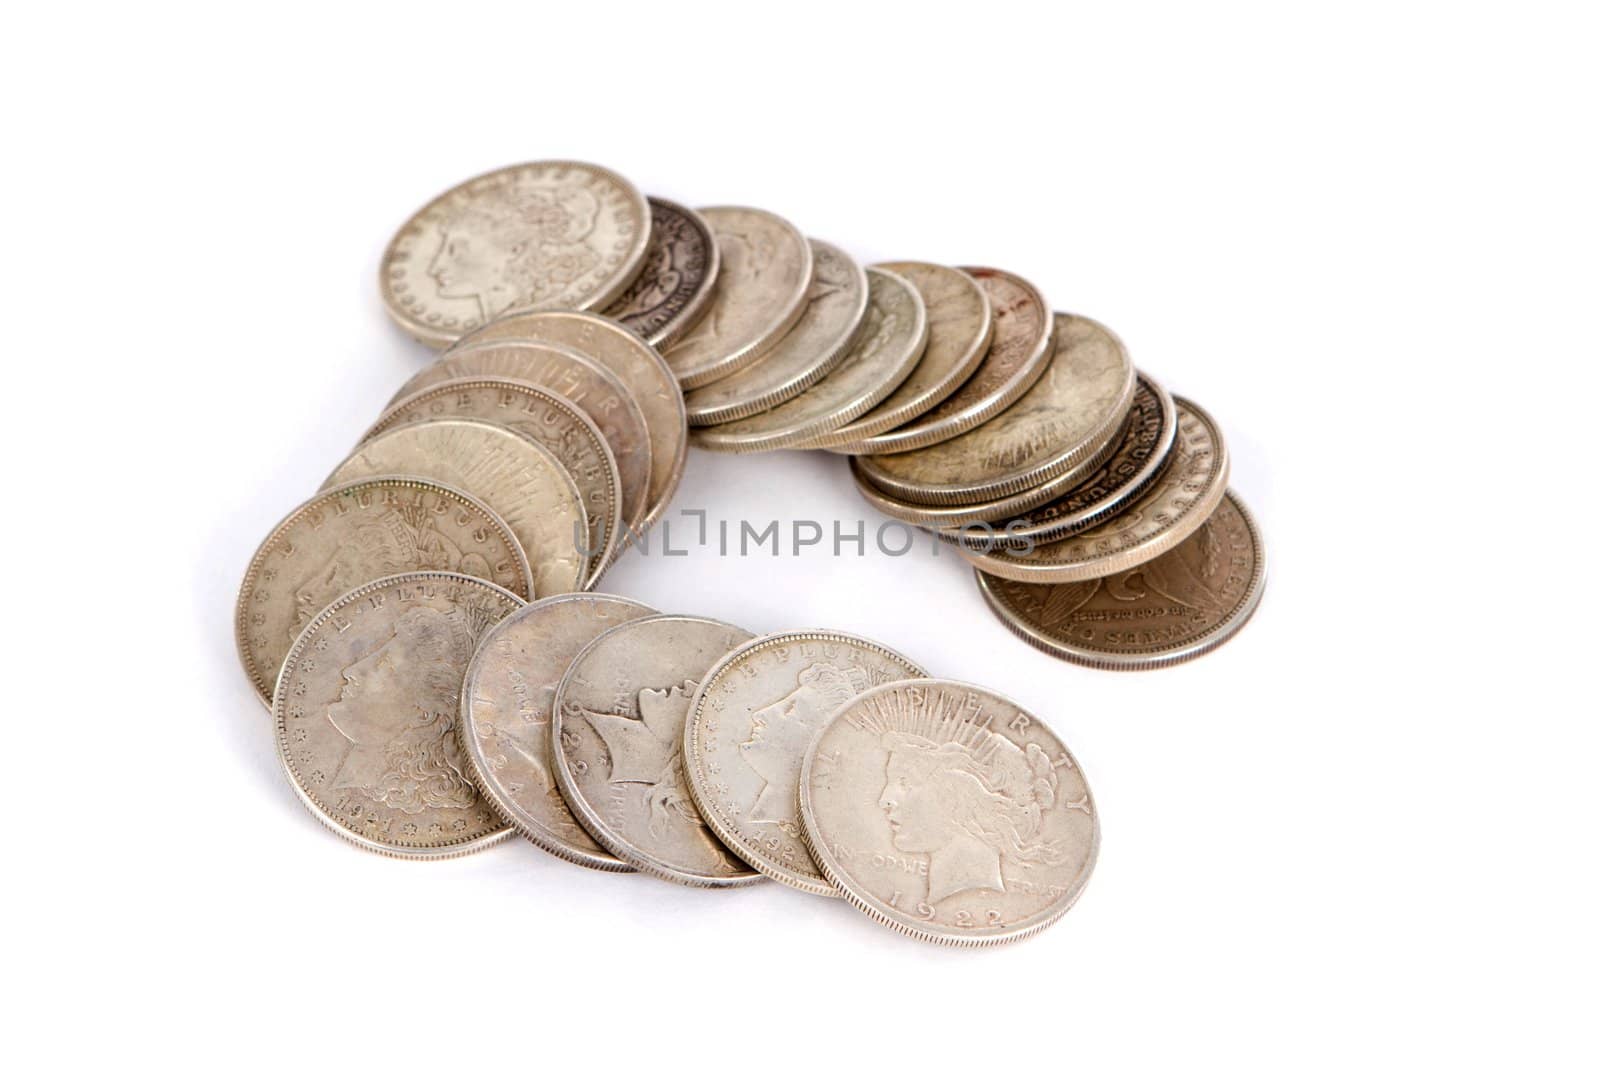 Old USA silver dollars money positioned on a white background.